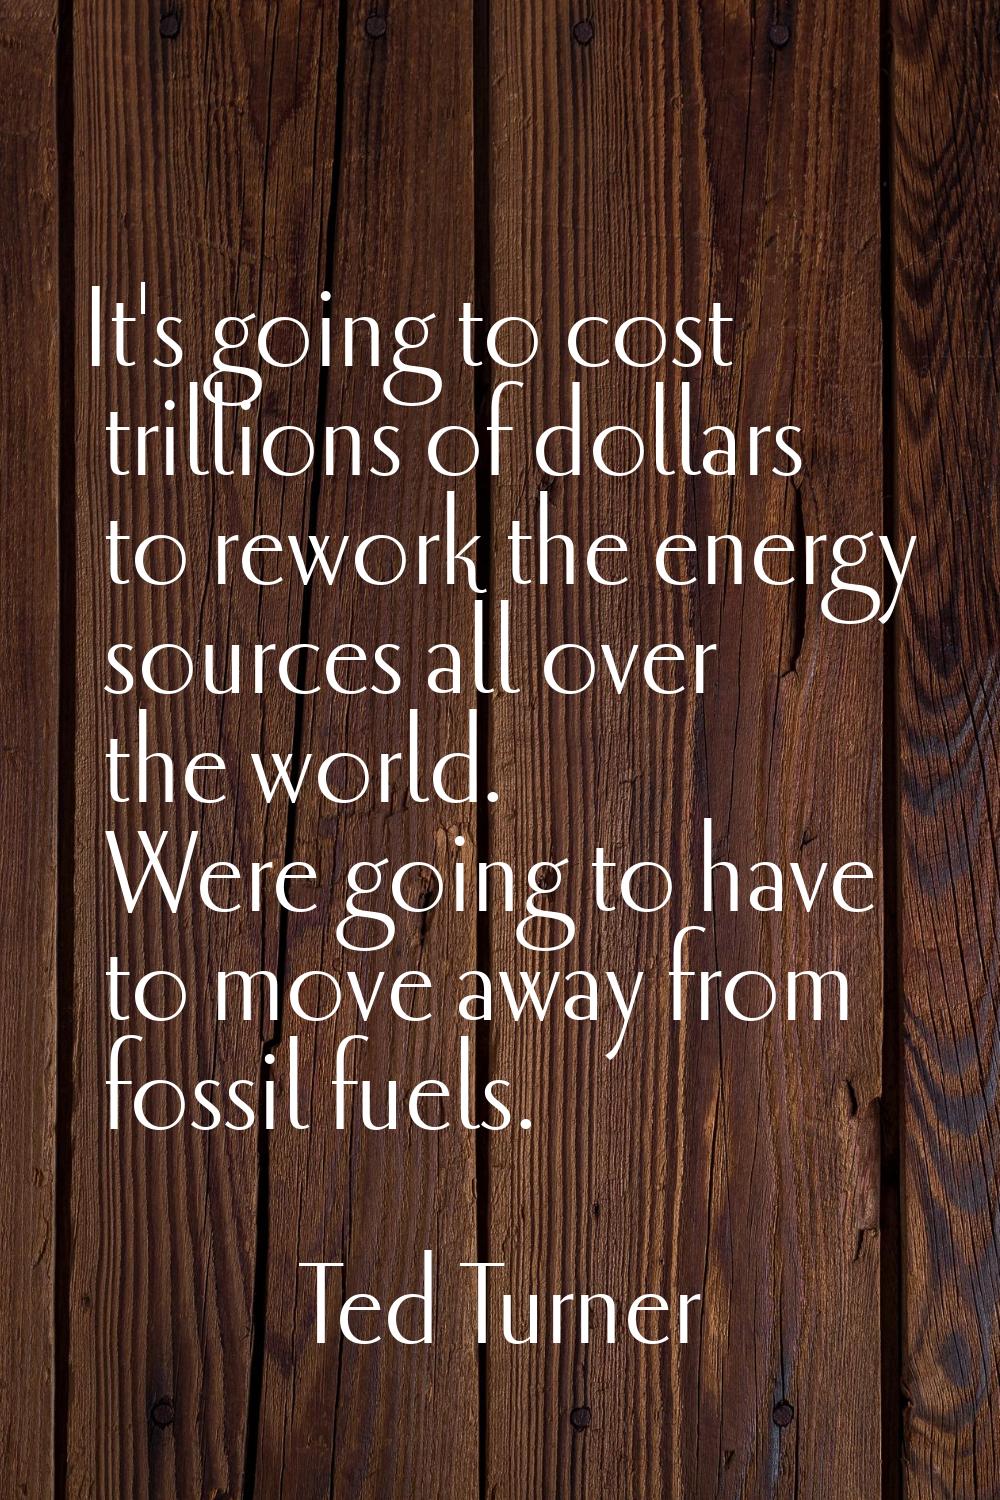 It's going to cost trillions of dollars to rework the energy sources all over the world. Were going